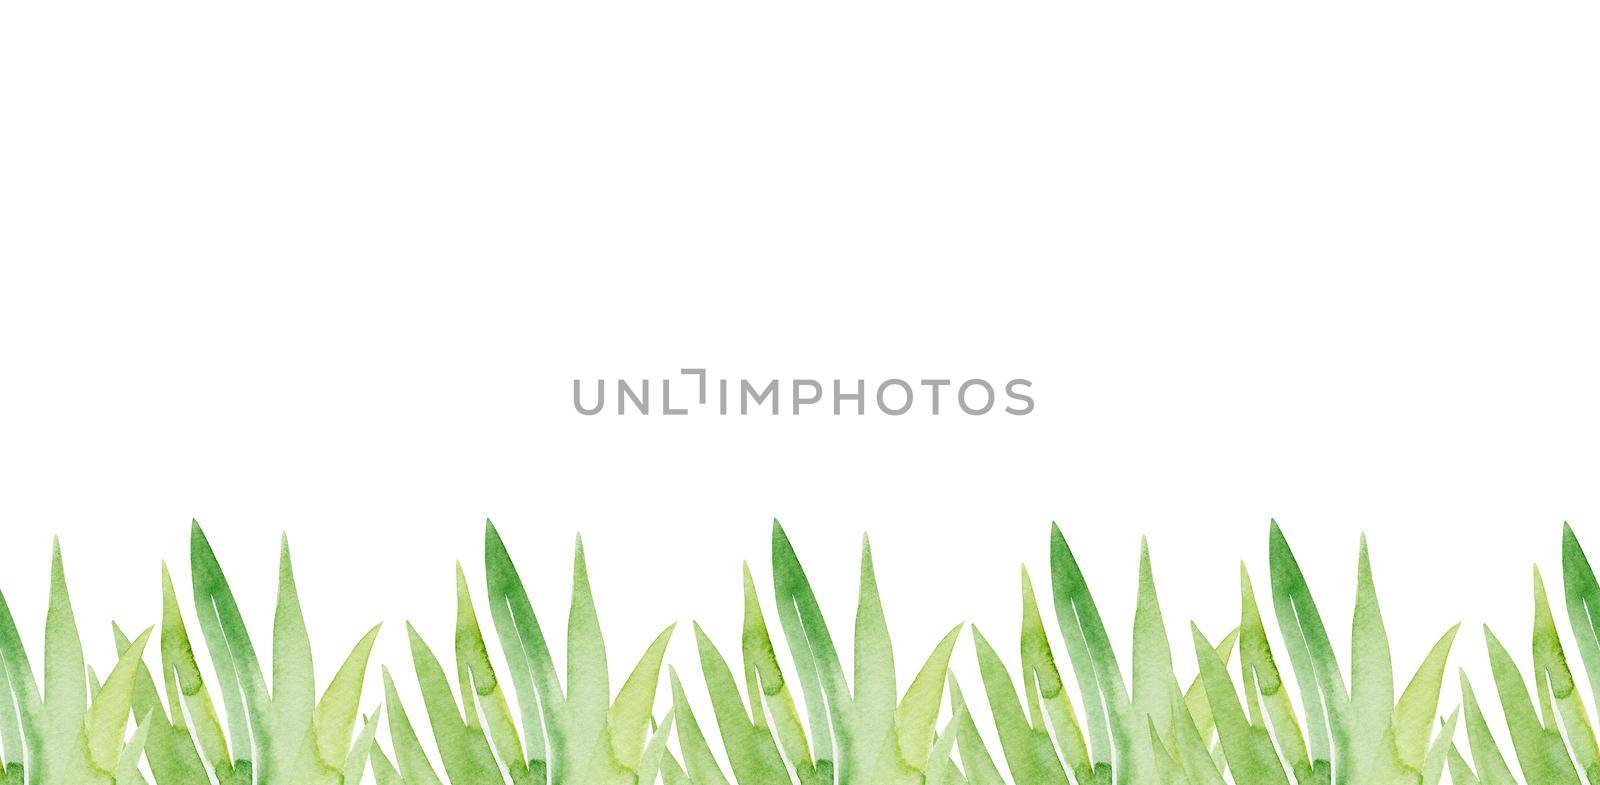 Watercolor green grass seamless border on white background.